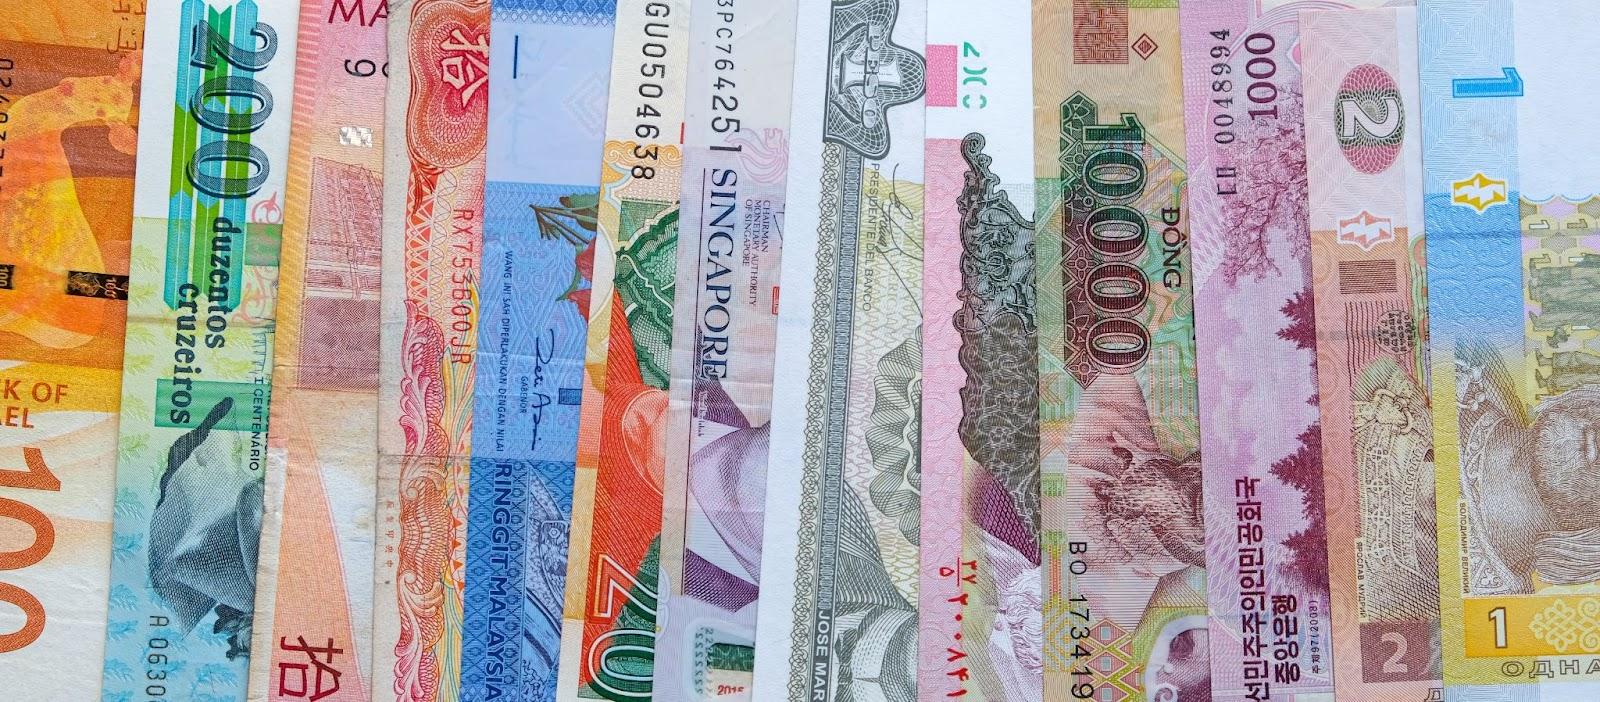 multi-currency banknotes